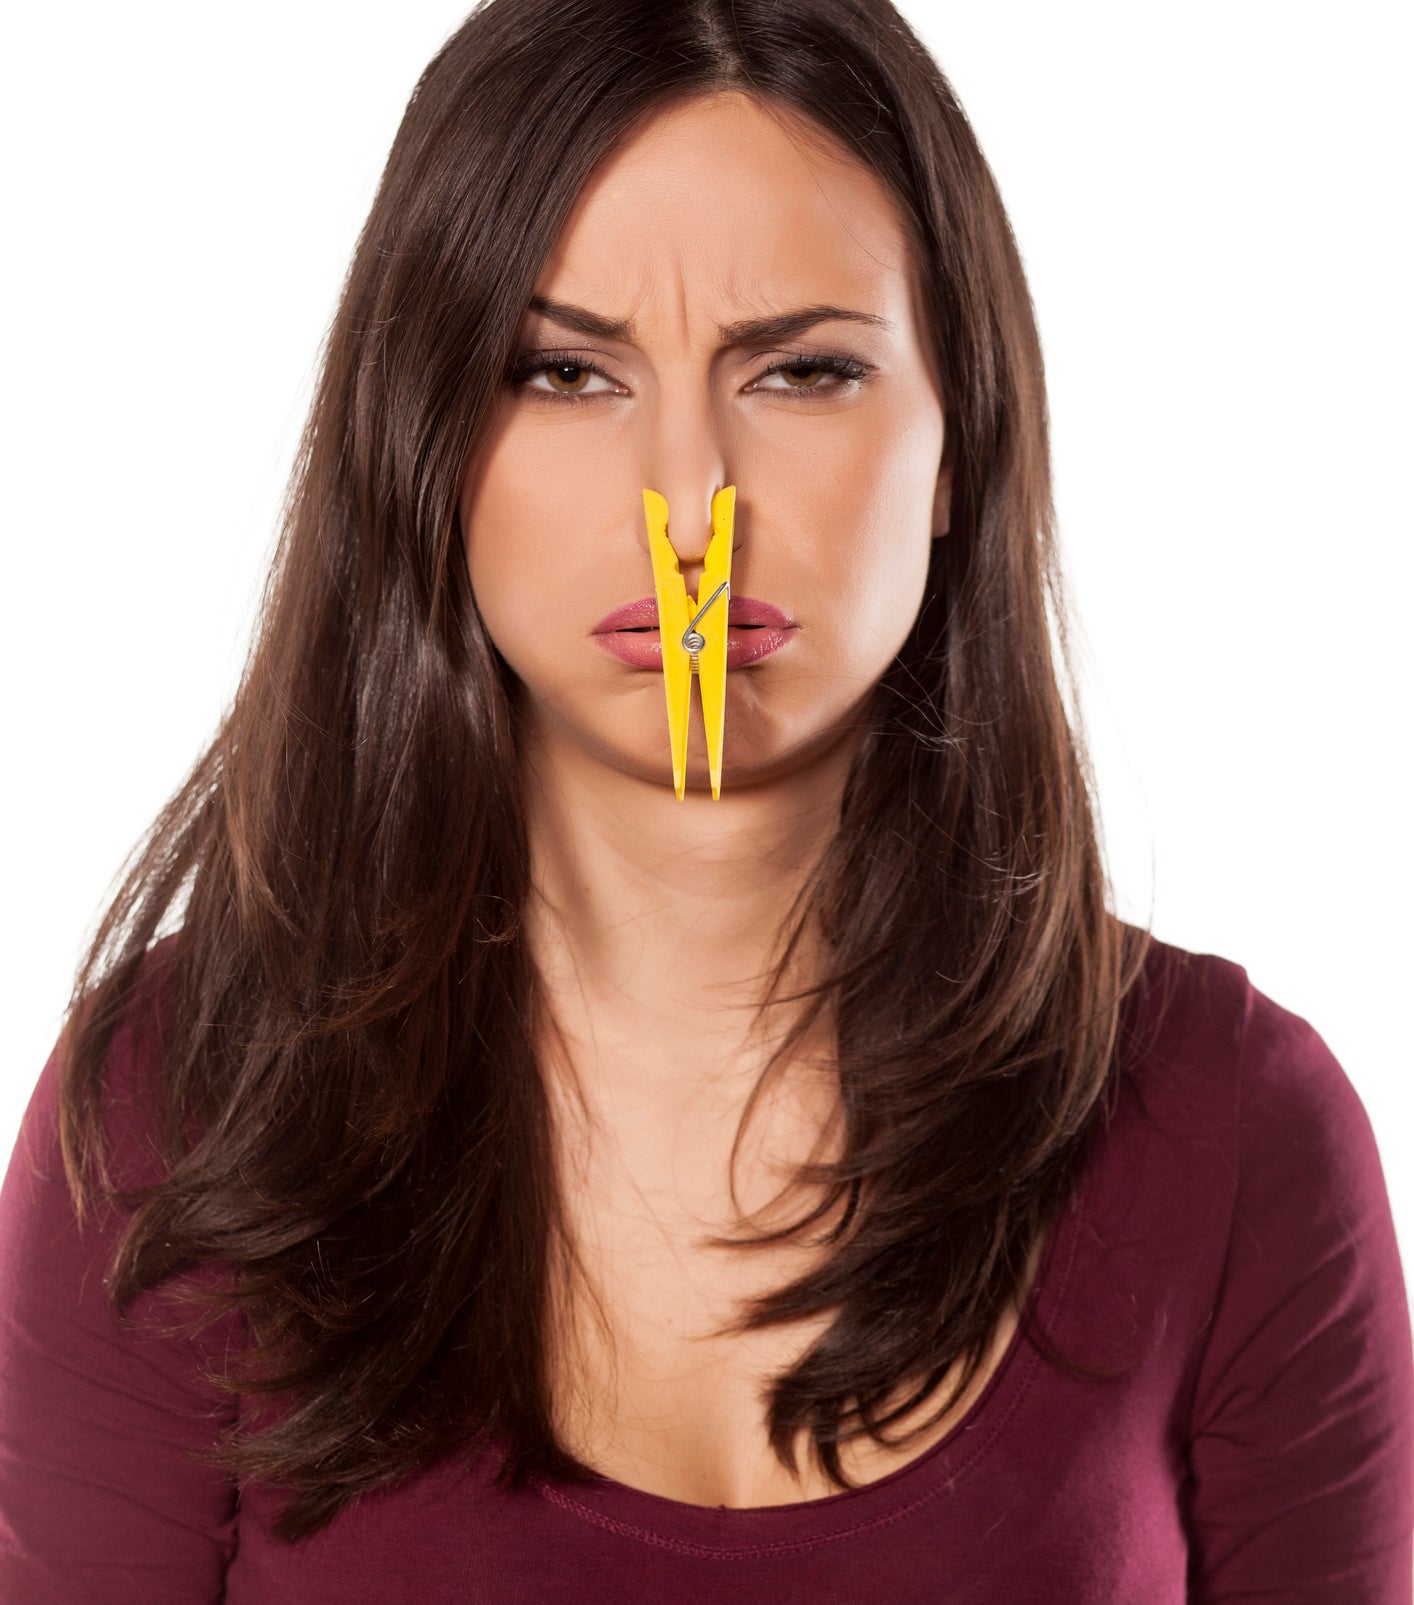 A woman with long hair has a clothespin clipped on her nose with a displeased expression